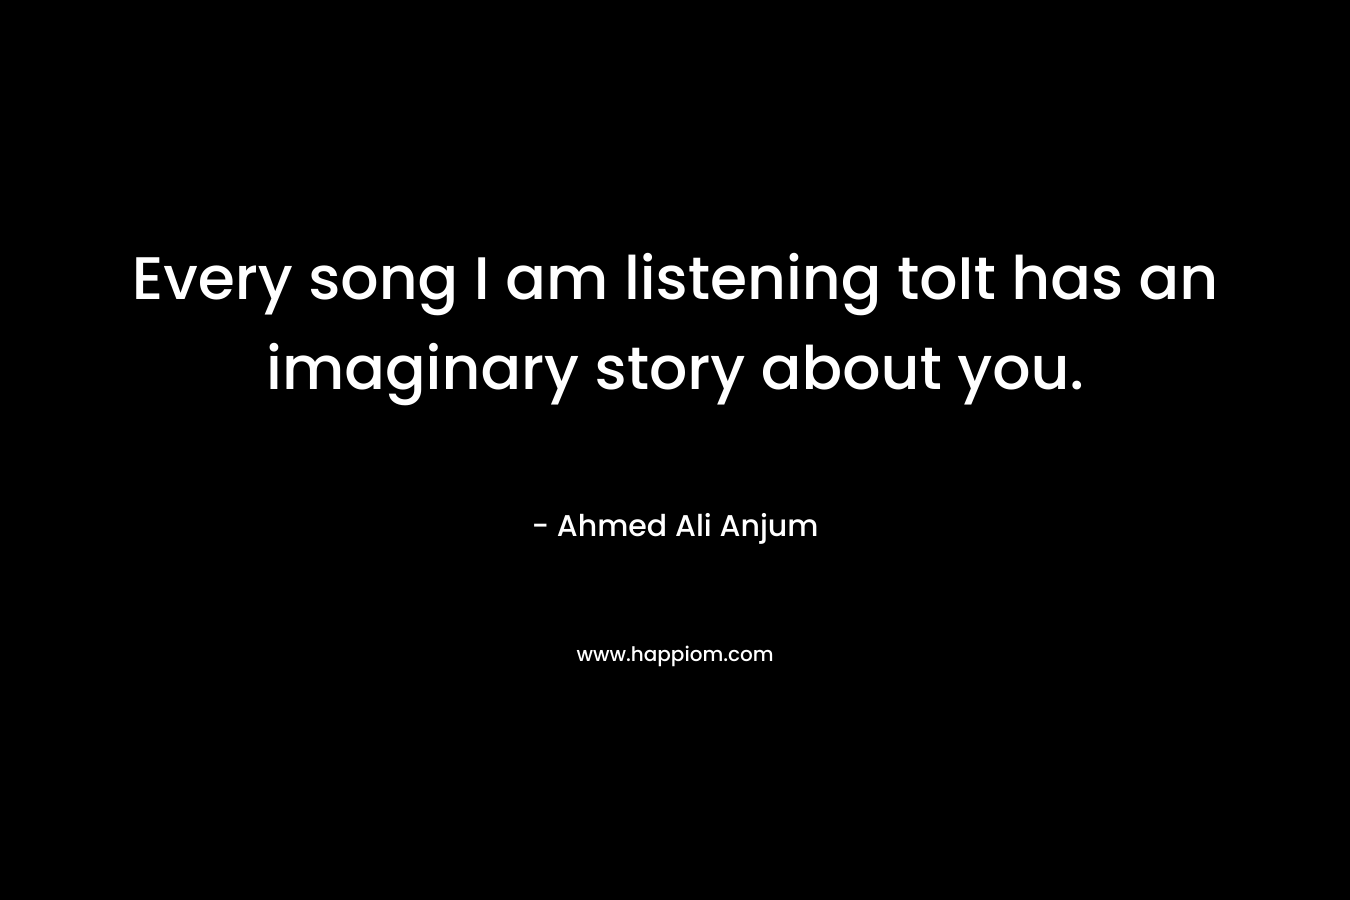 Every song I am listening toIt has an imaginary story about you.